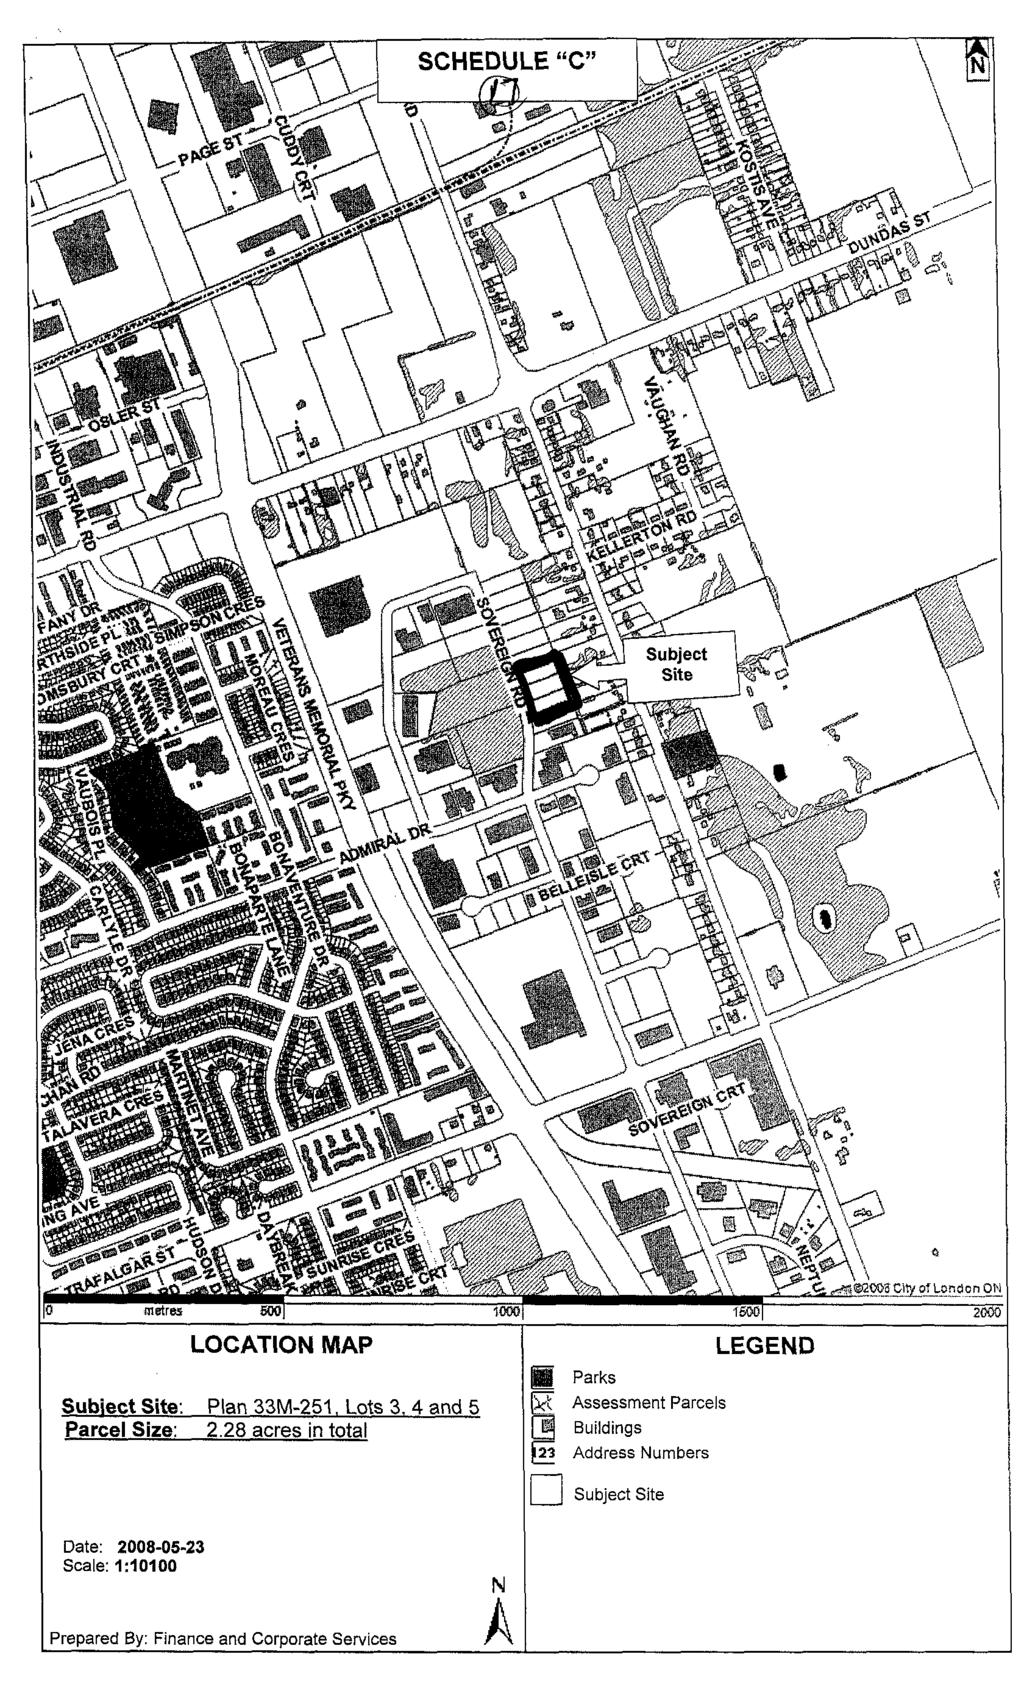 Subiect Site: Parcel Size: LOCATION MAP Plan 33M-251, Lots 3. 4 and 5 2.